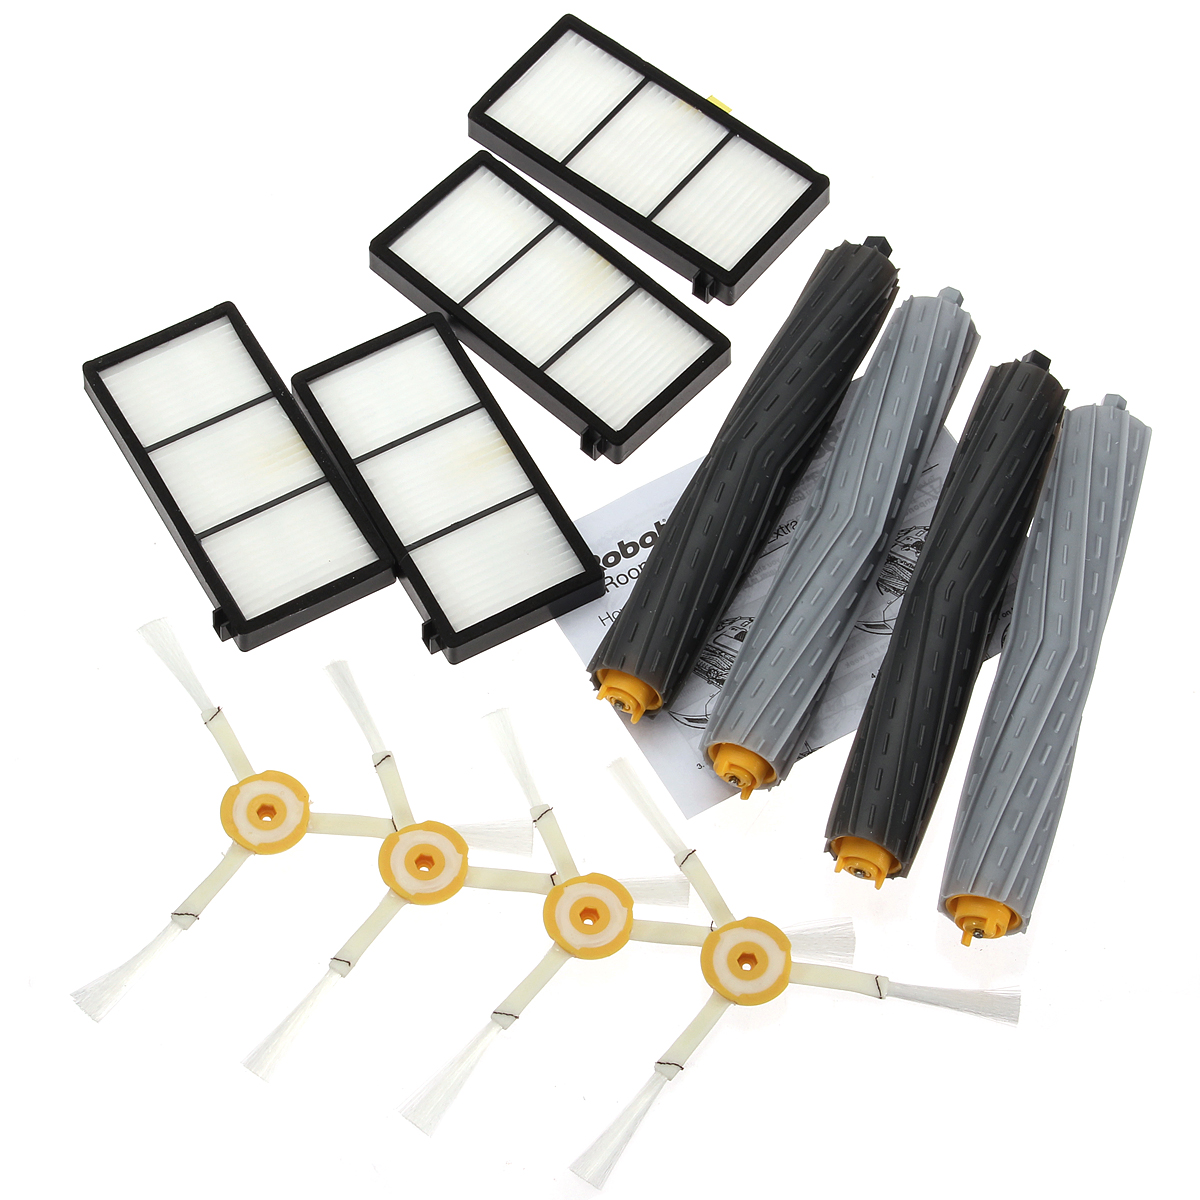 

12Pcs Extractor Brus Filter Kit for iRobot Roomba 800 Series 870 880 Cleaner SET Spare Parts